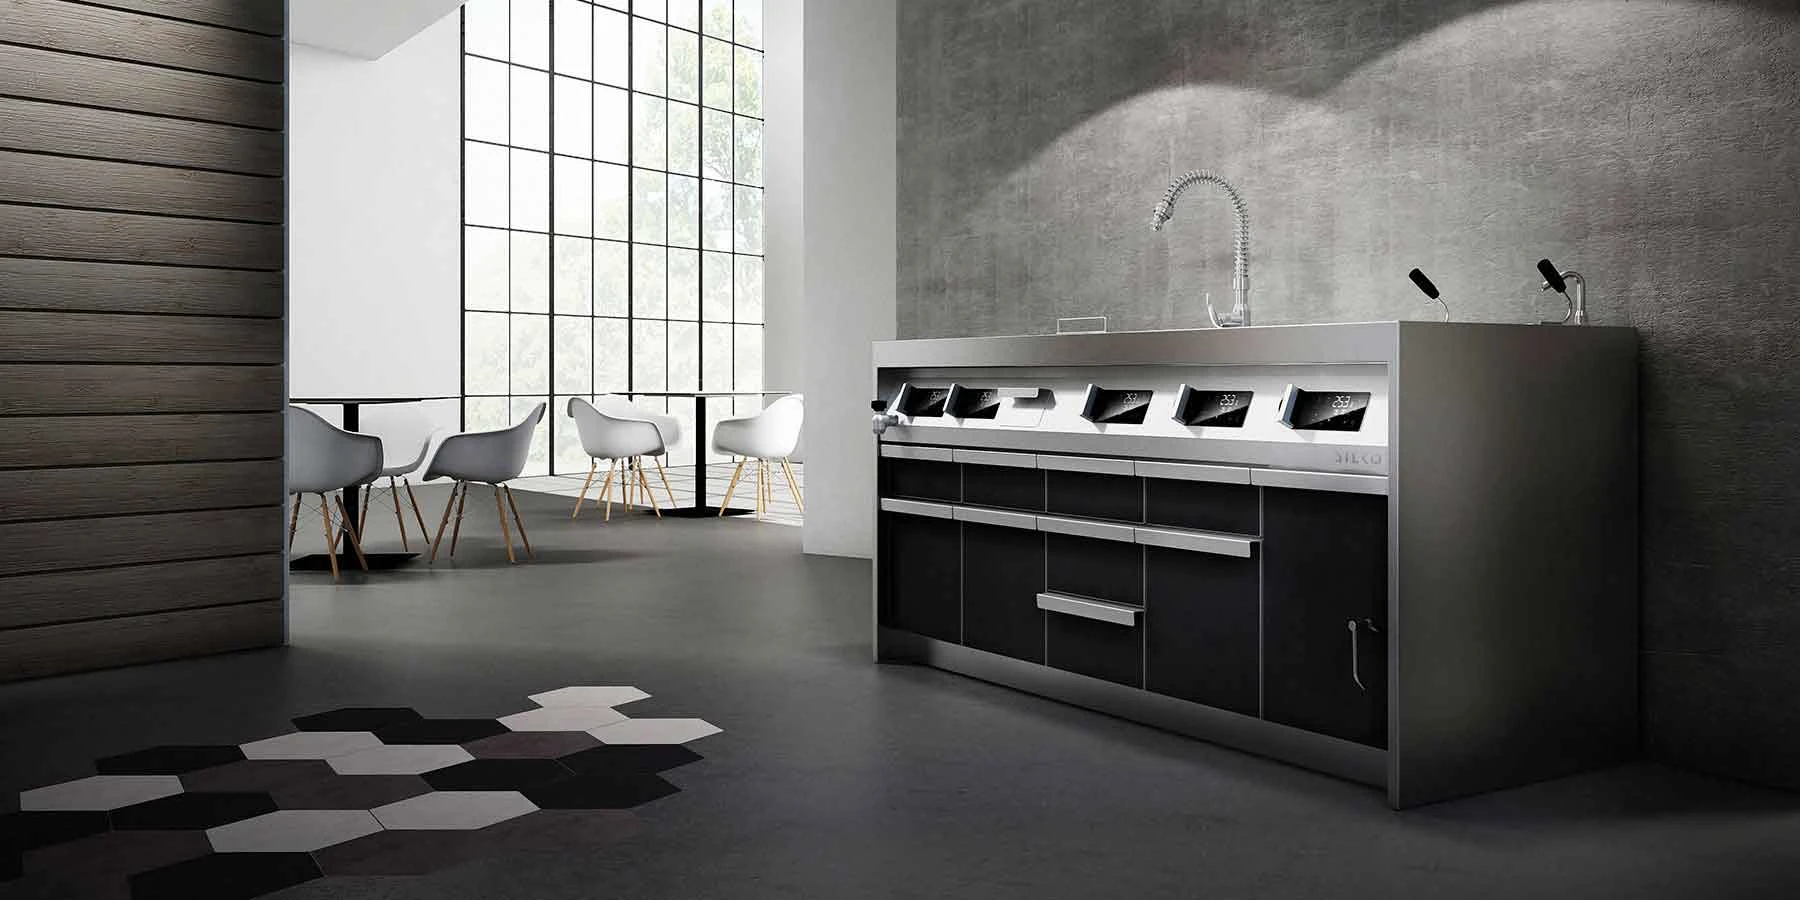 Silko: industrial kitchens embraces design - By HDG